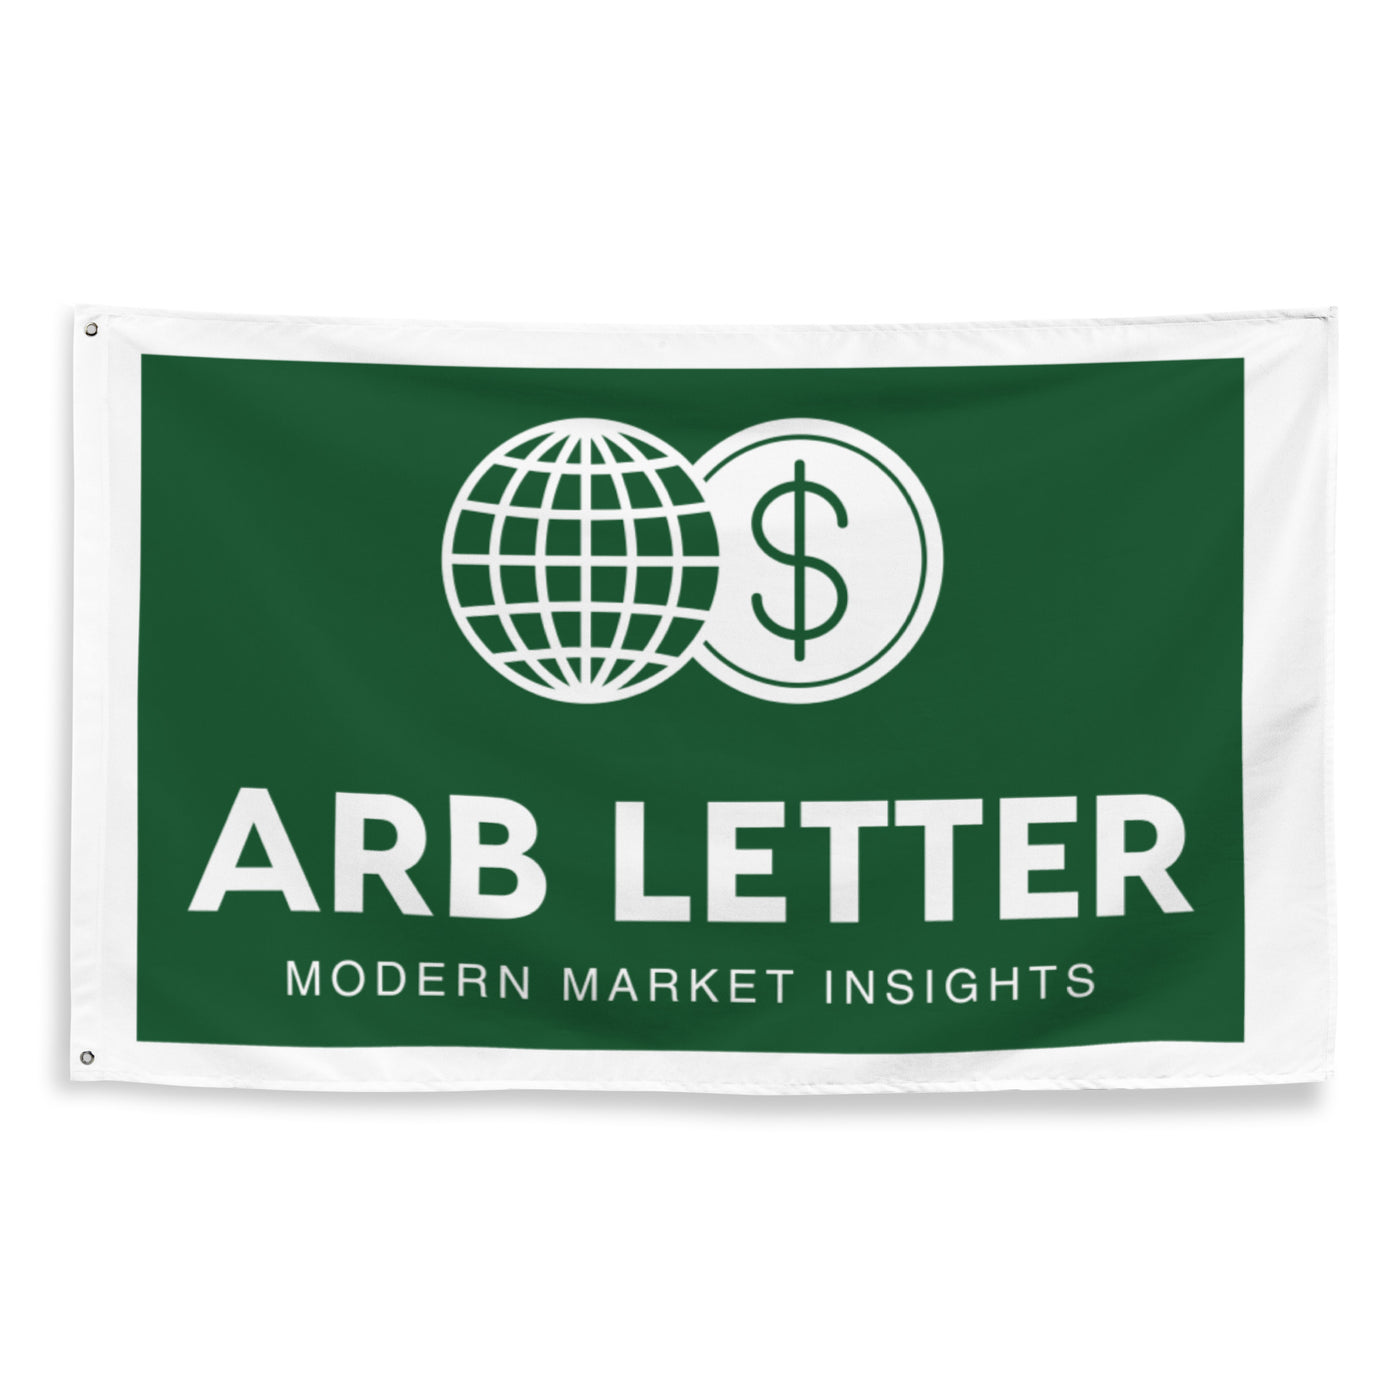 Arb Letter Flag - Arbitrage Andy